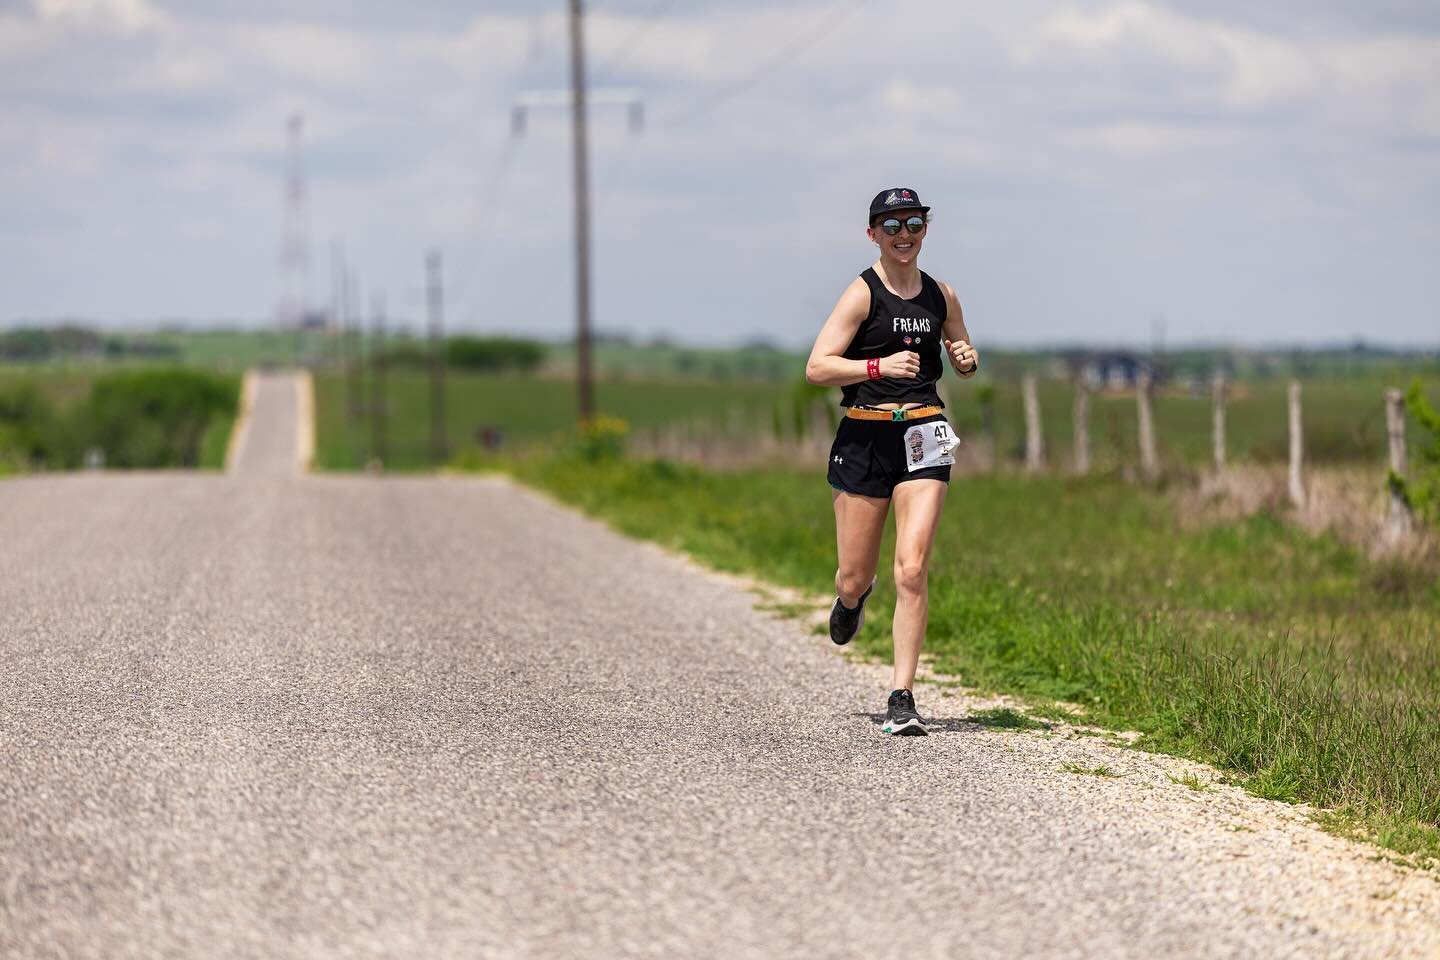 &ldquo;I would definitely do it again. My favorite part was racing as a team and getting to know each other in the downtime. The scenery was beautiful and it was great running out in places I haven&rsquo;t been before.
⠀⠀⠀⠀
Freaks made it fun with ju